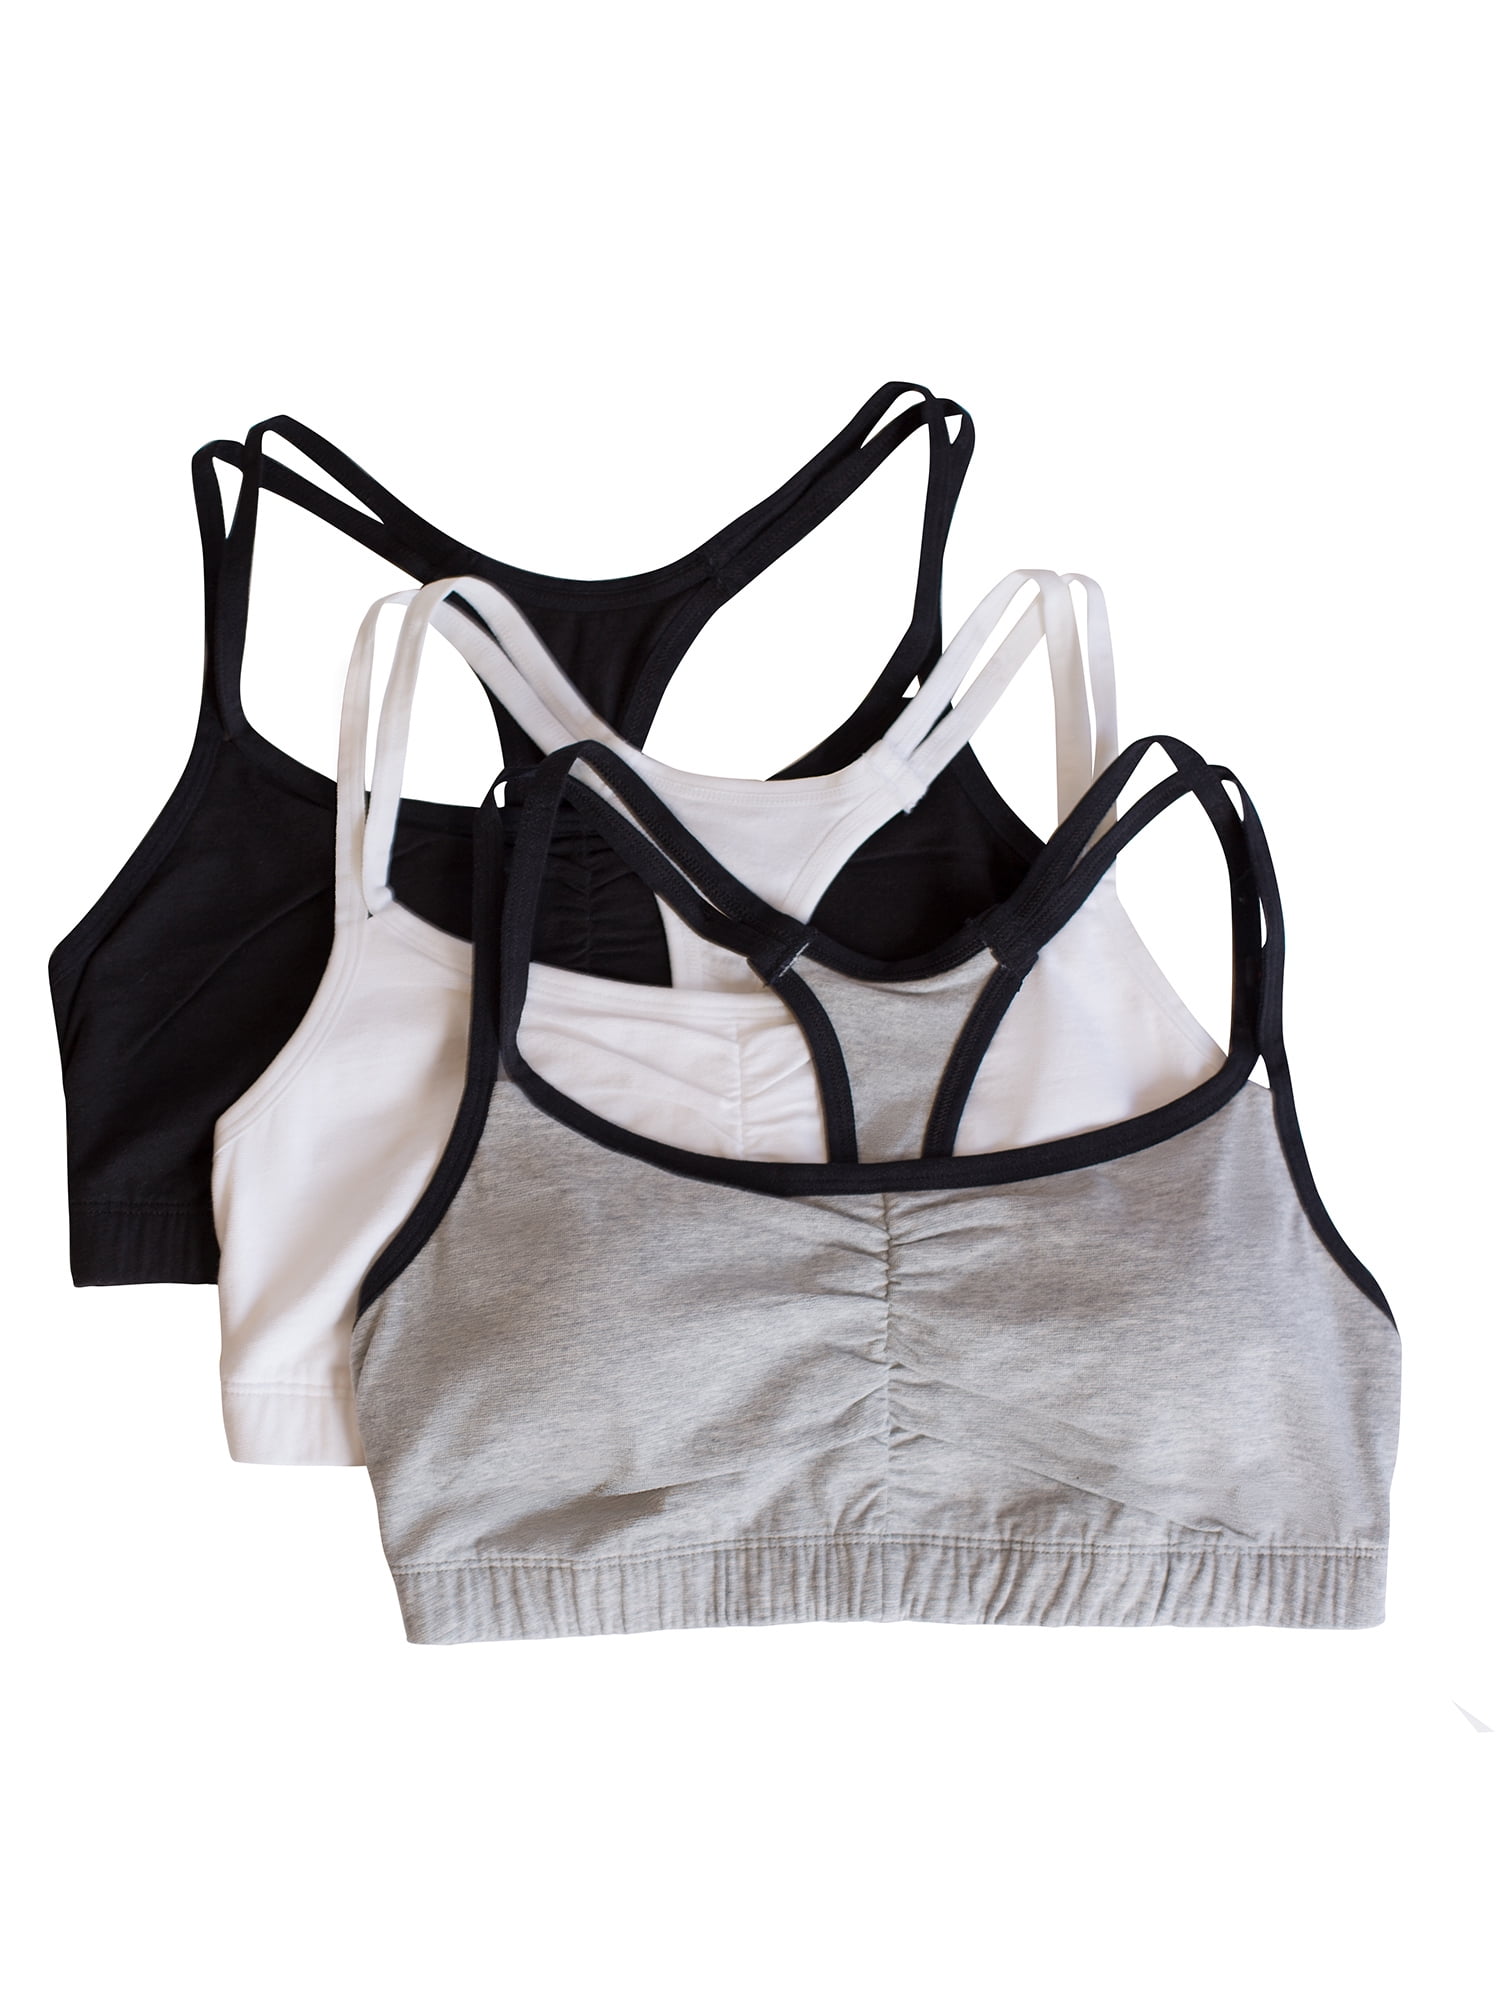 Fruit of the Loom Womens Racerback Strappy Cotton Nigeria